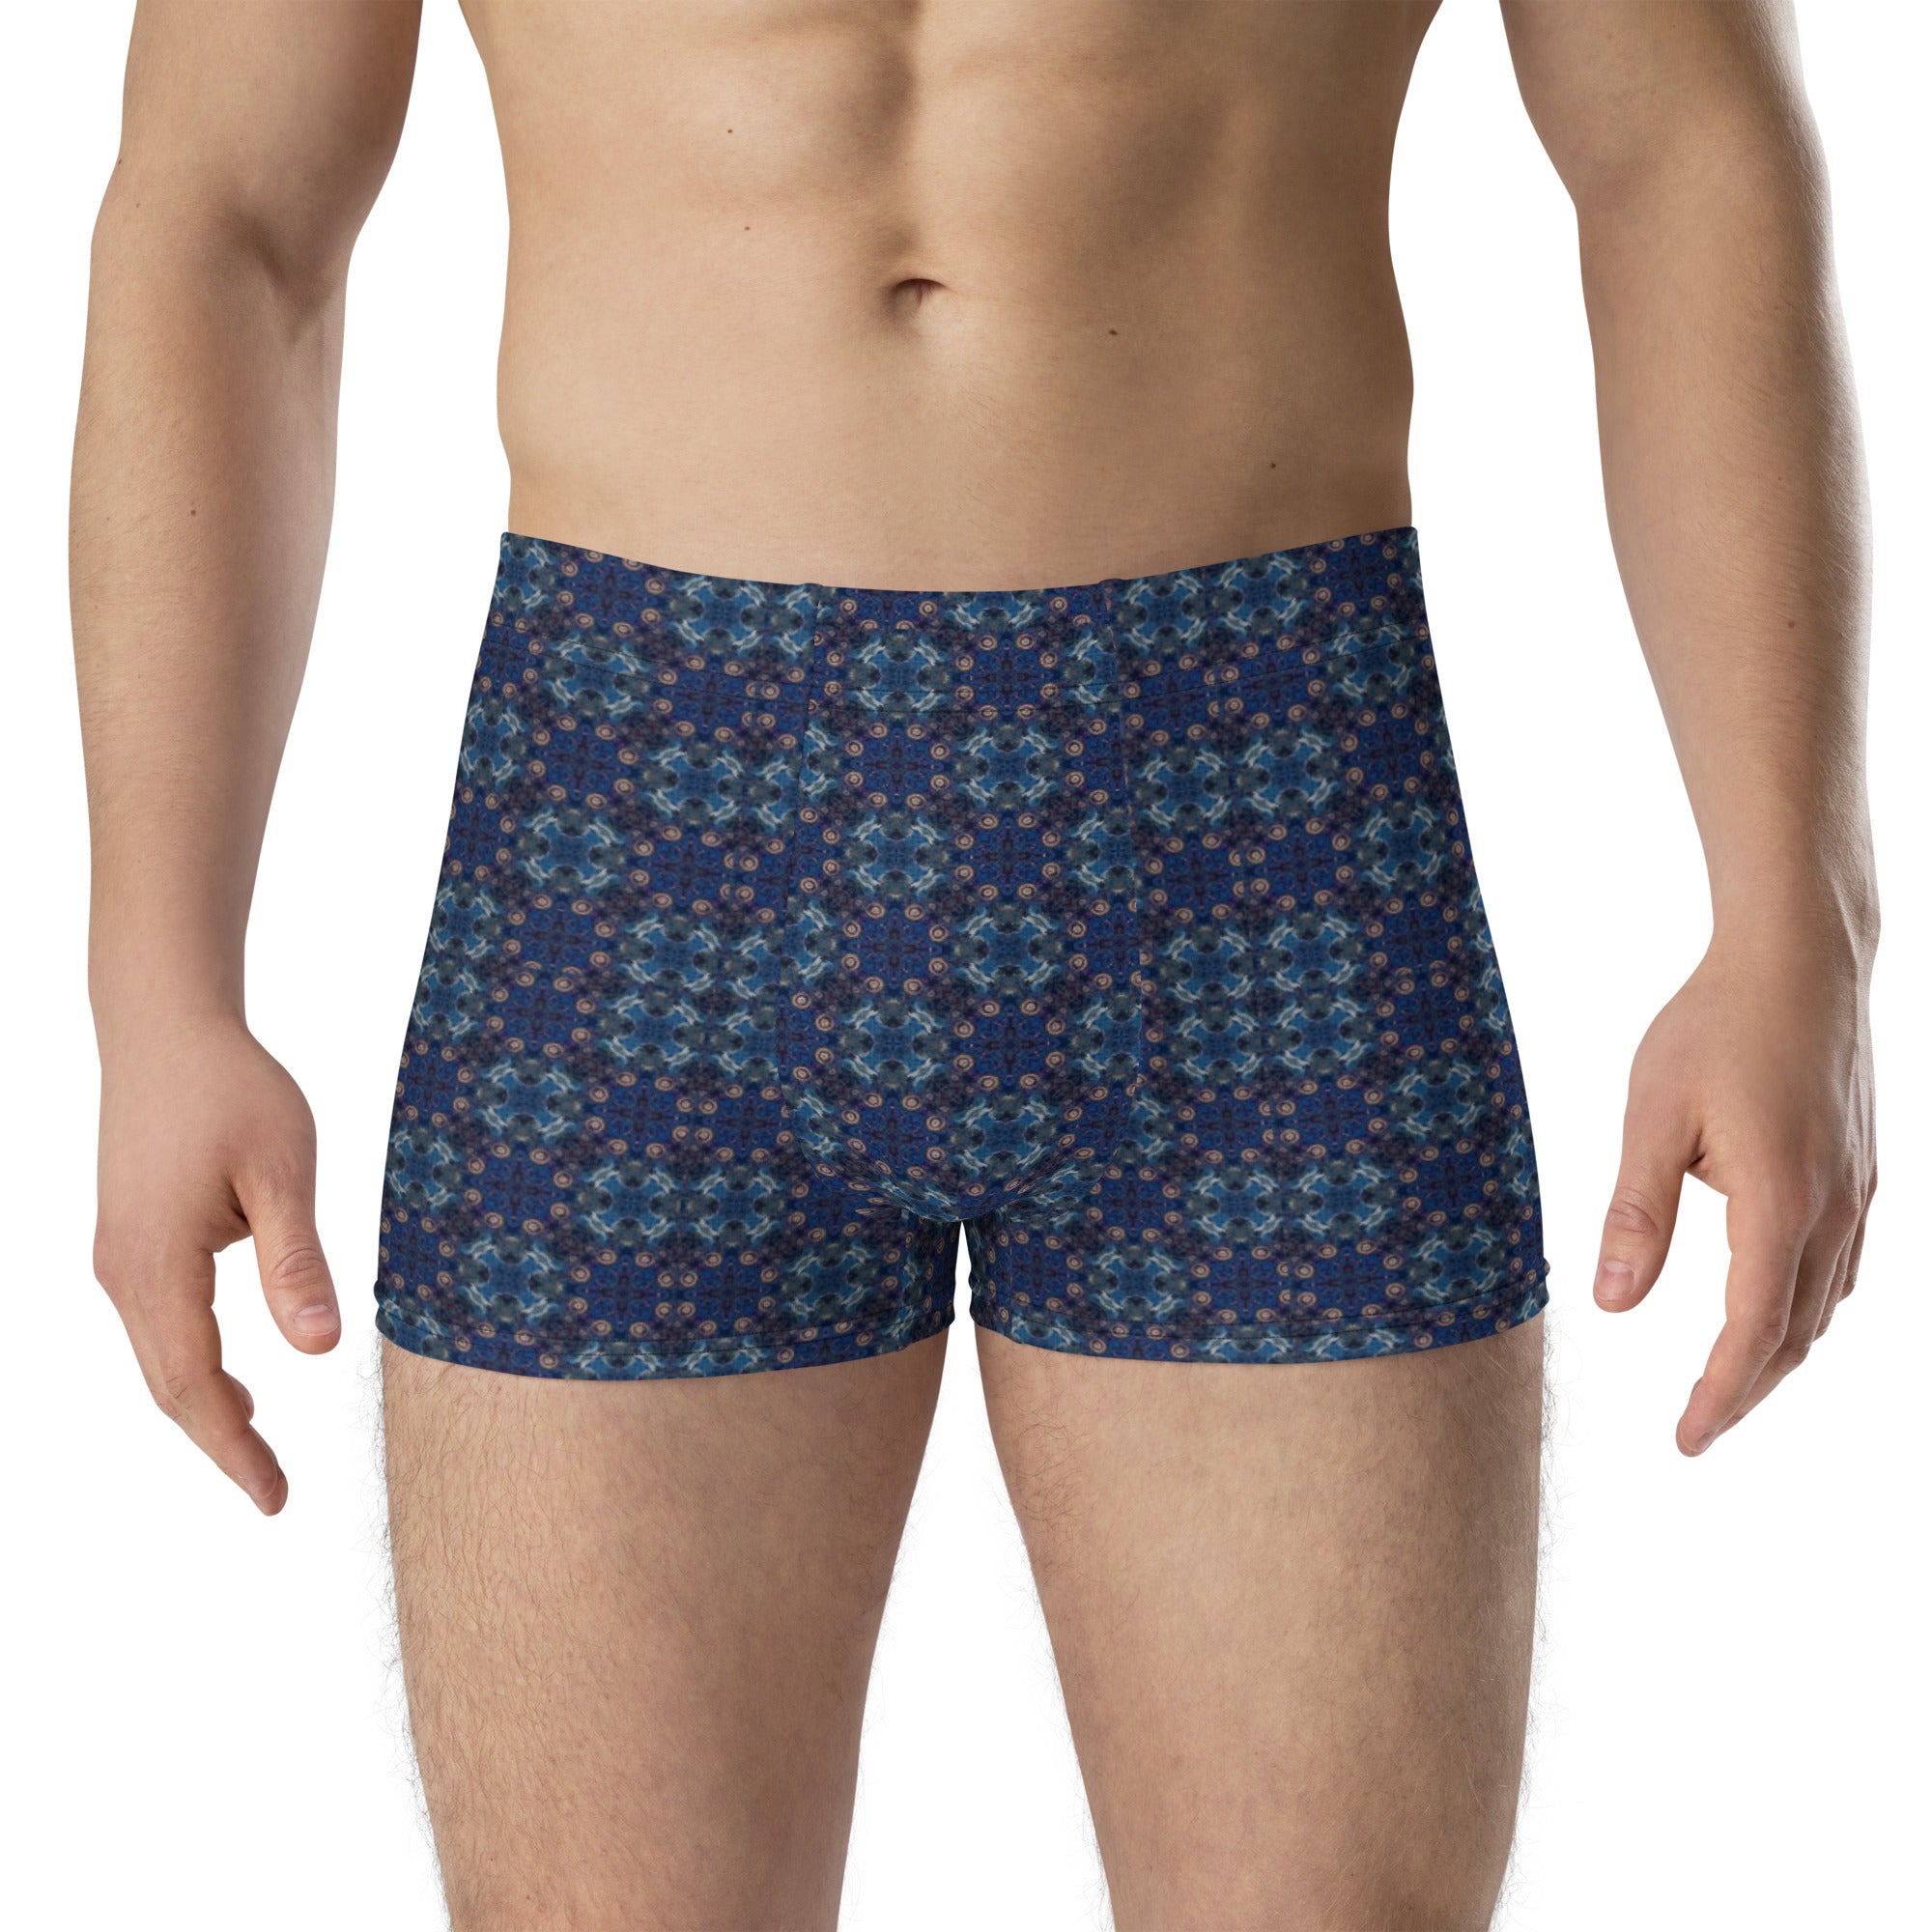 Vibrant and colorful all-over print boxer briefs for men